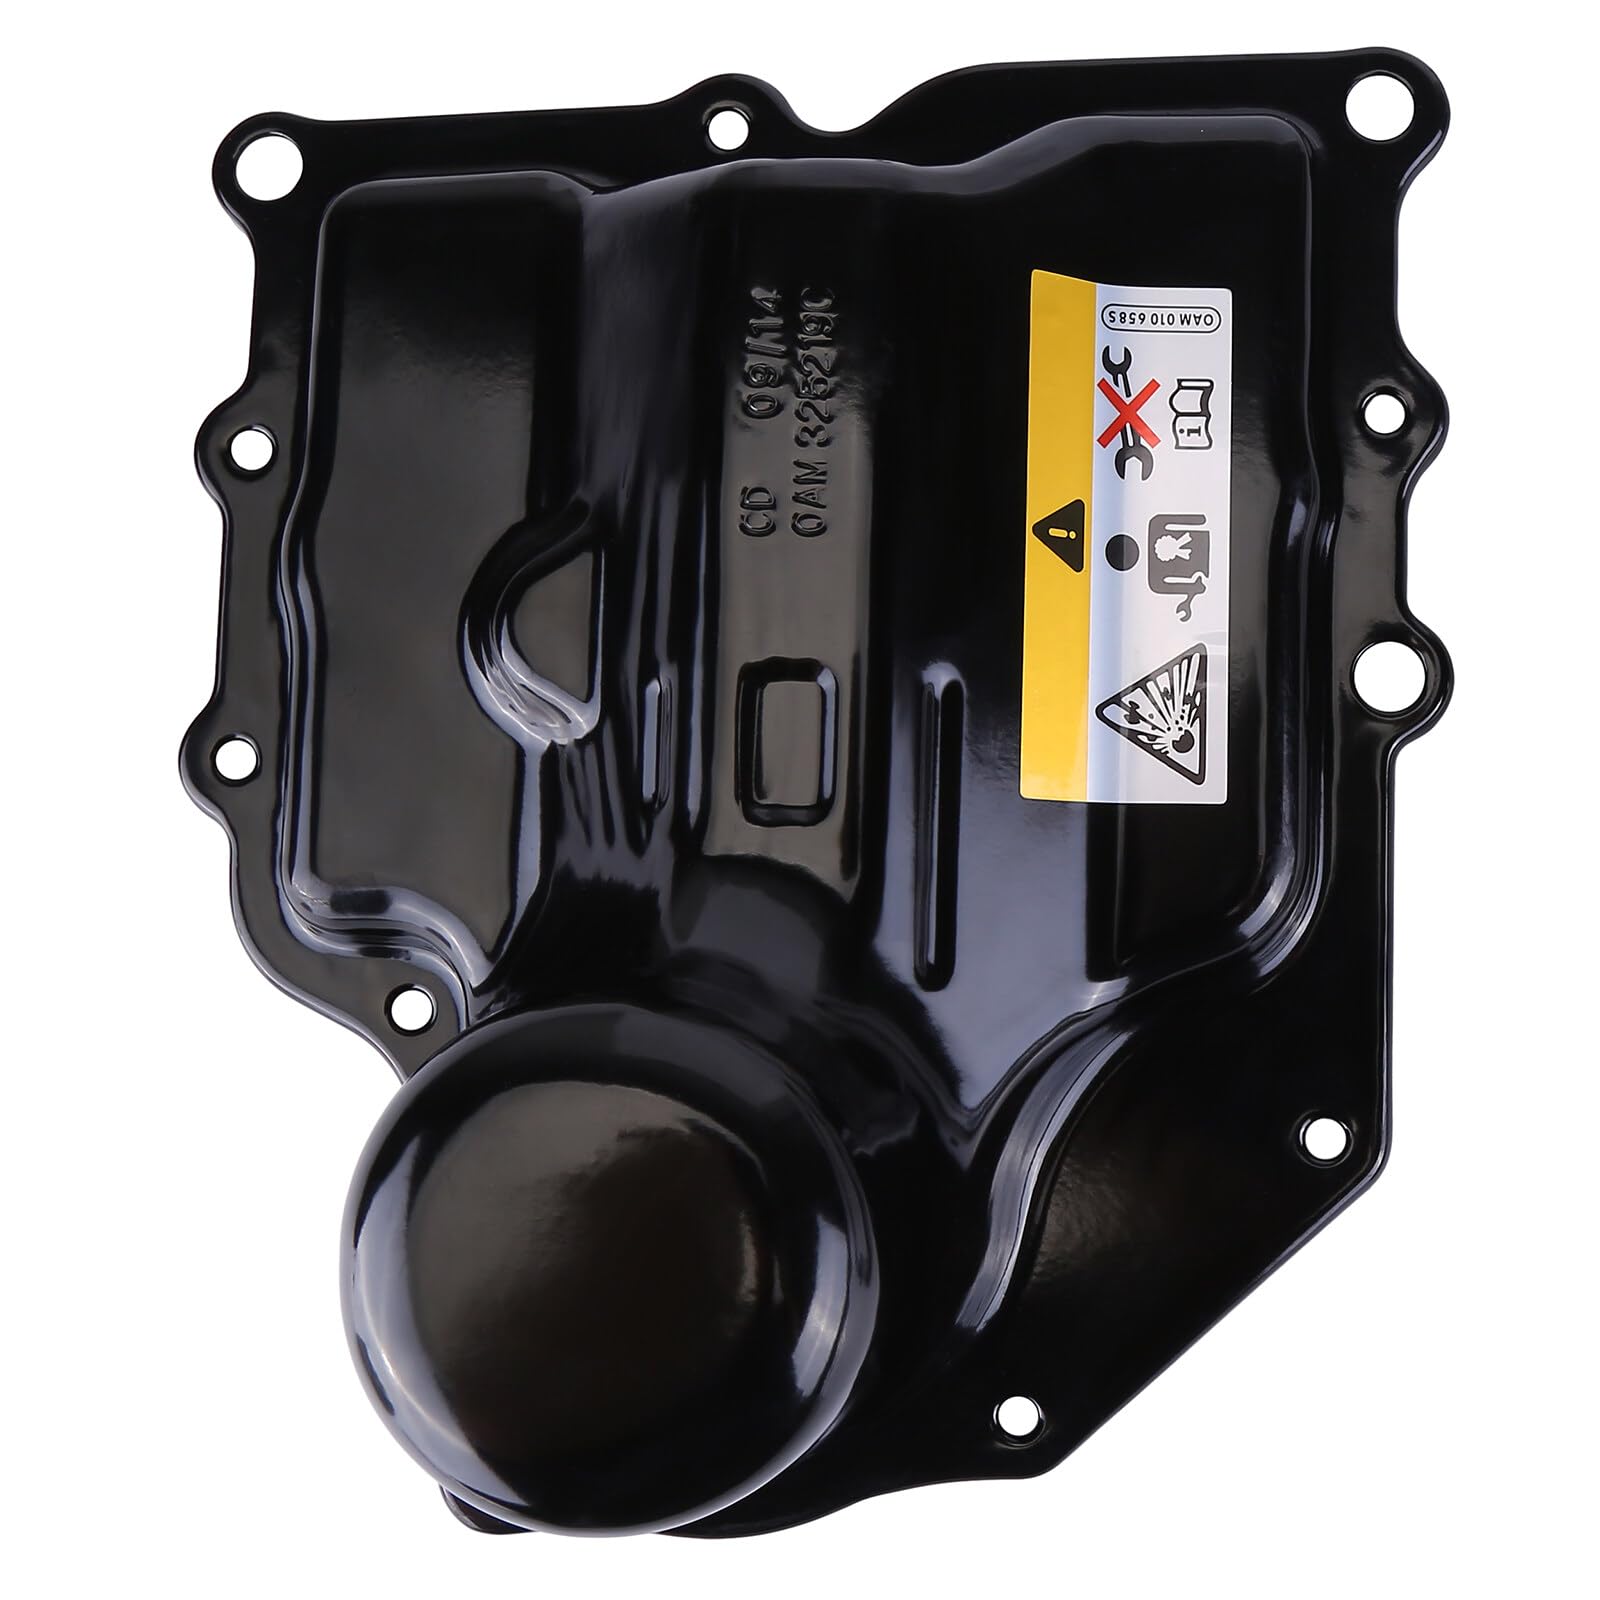 EUWLY Oil Pan Cover DSG Mechatronics 7Gear 0AM DQ200 for VAG Including Gasket 0AM325219C von EUWLY